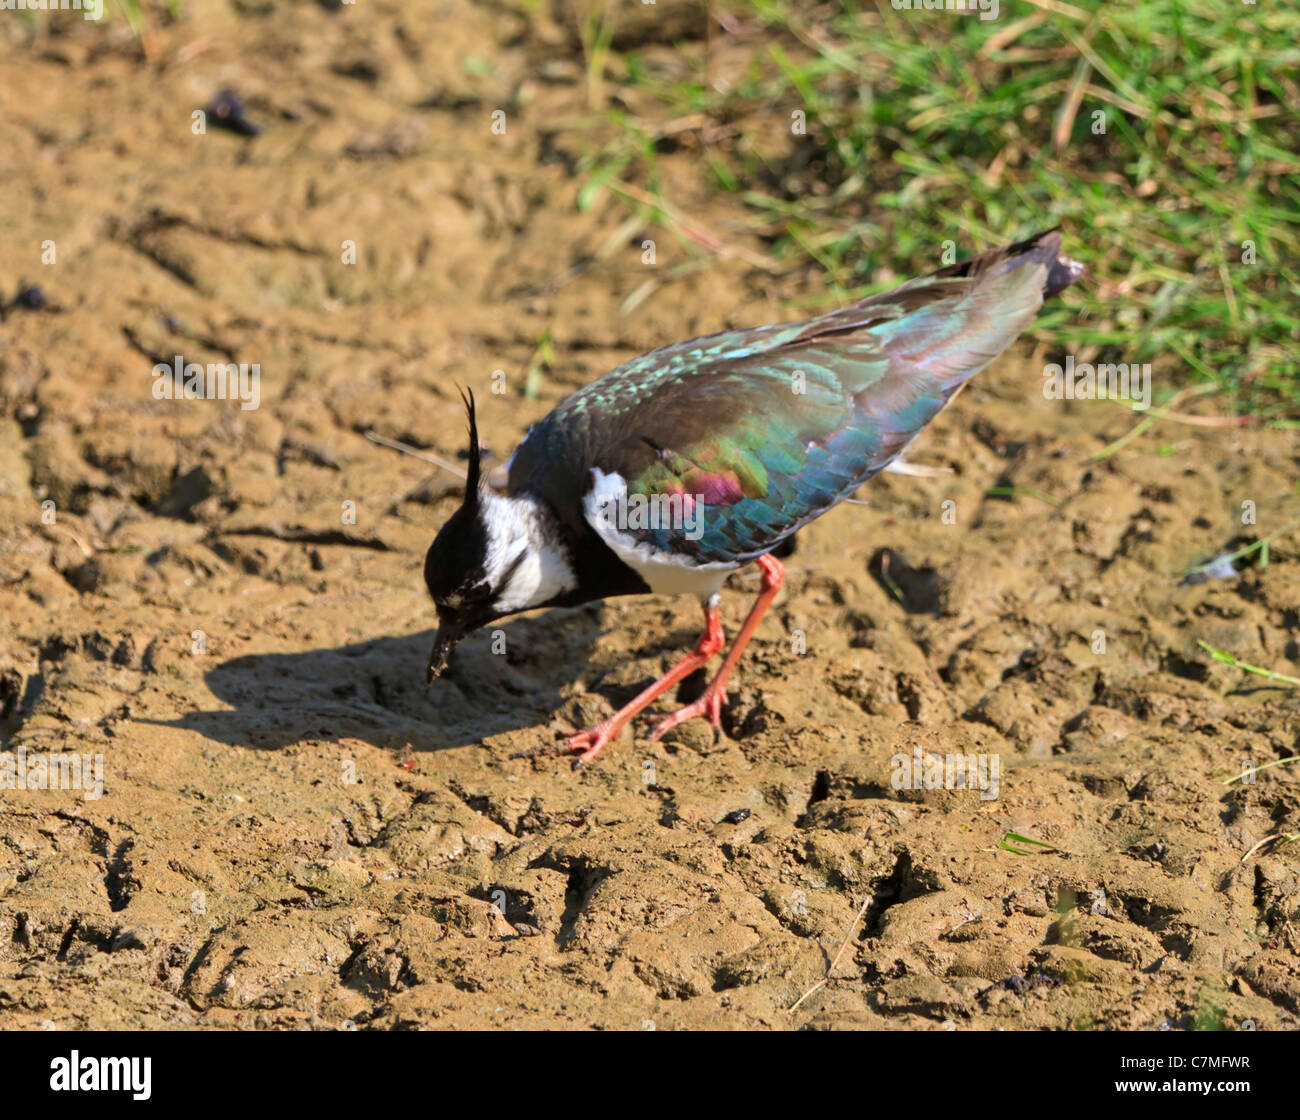 Northern Lapwing, Vanellus vanellus. Migratory wader breeds on cultivated land and mudflats. Stock Photo